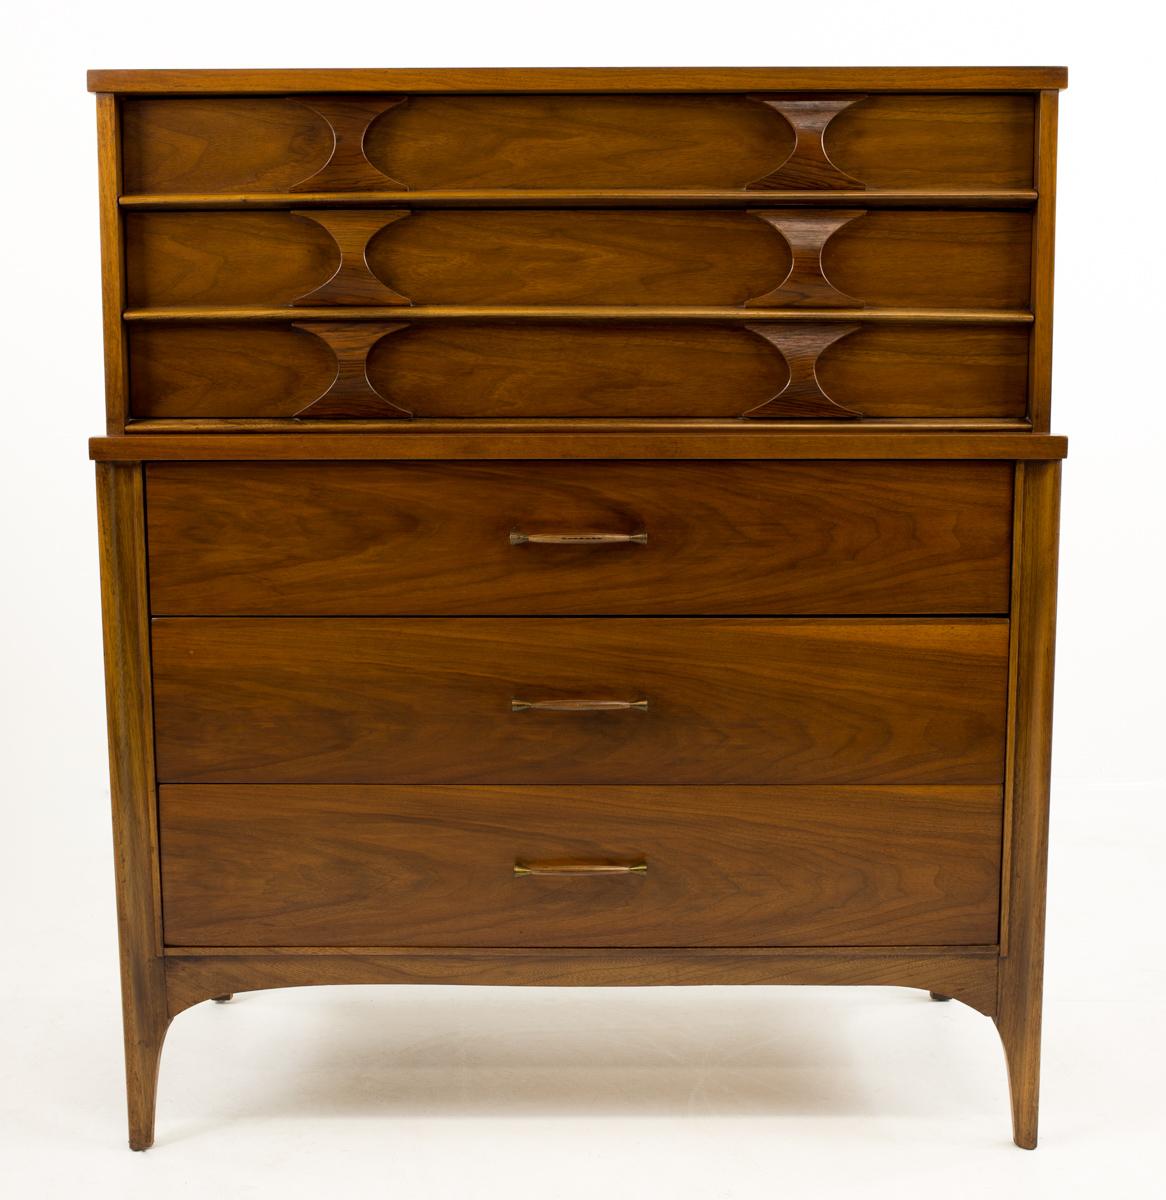 Kent Coffey Perspecta mid century walnut and rosewood 5 drawer highboy dresser

This dresser measures 40.25 wide x 19.25 deep x 46 inches high

All pieces of furniture can be had in what we call restored vintage condition. That means the piece